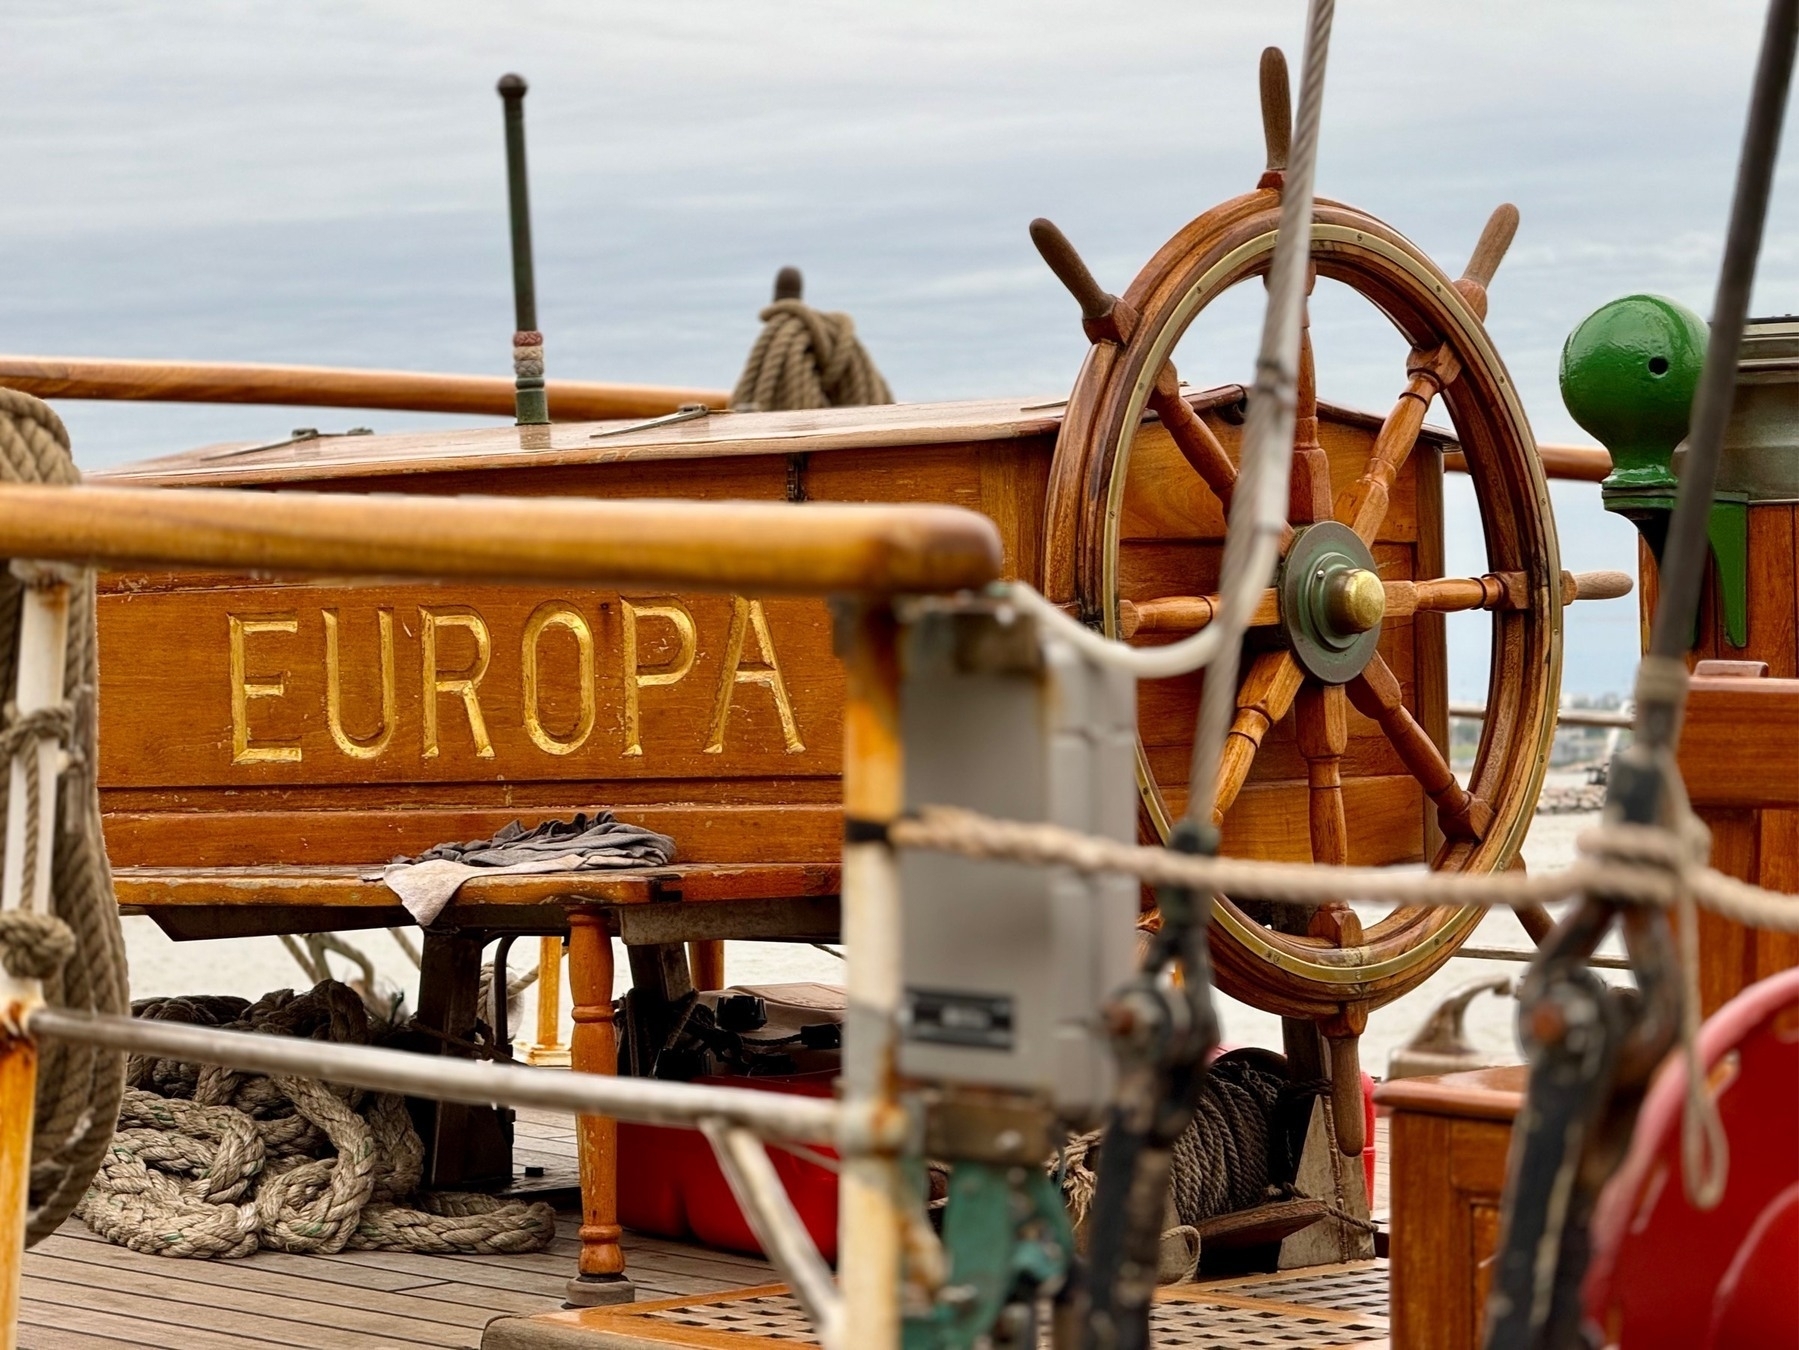 The stern of a sailing boat, including the wheel, with her name 